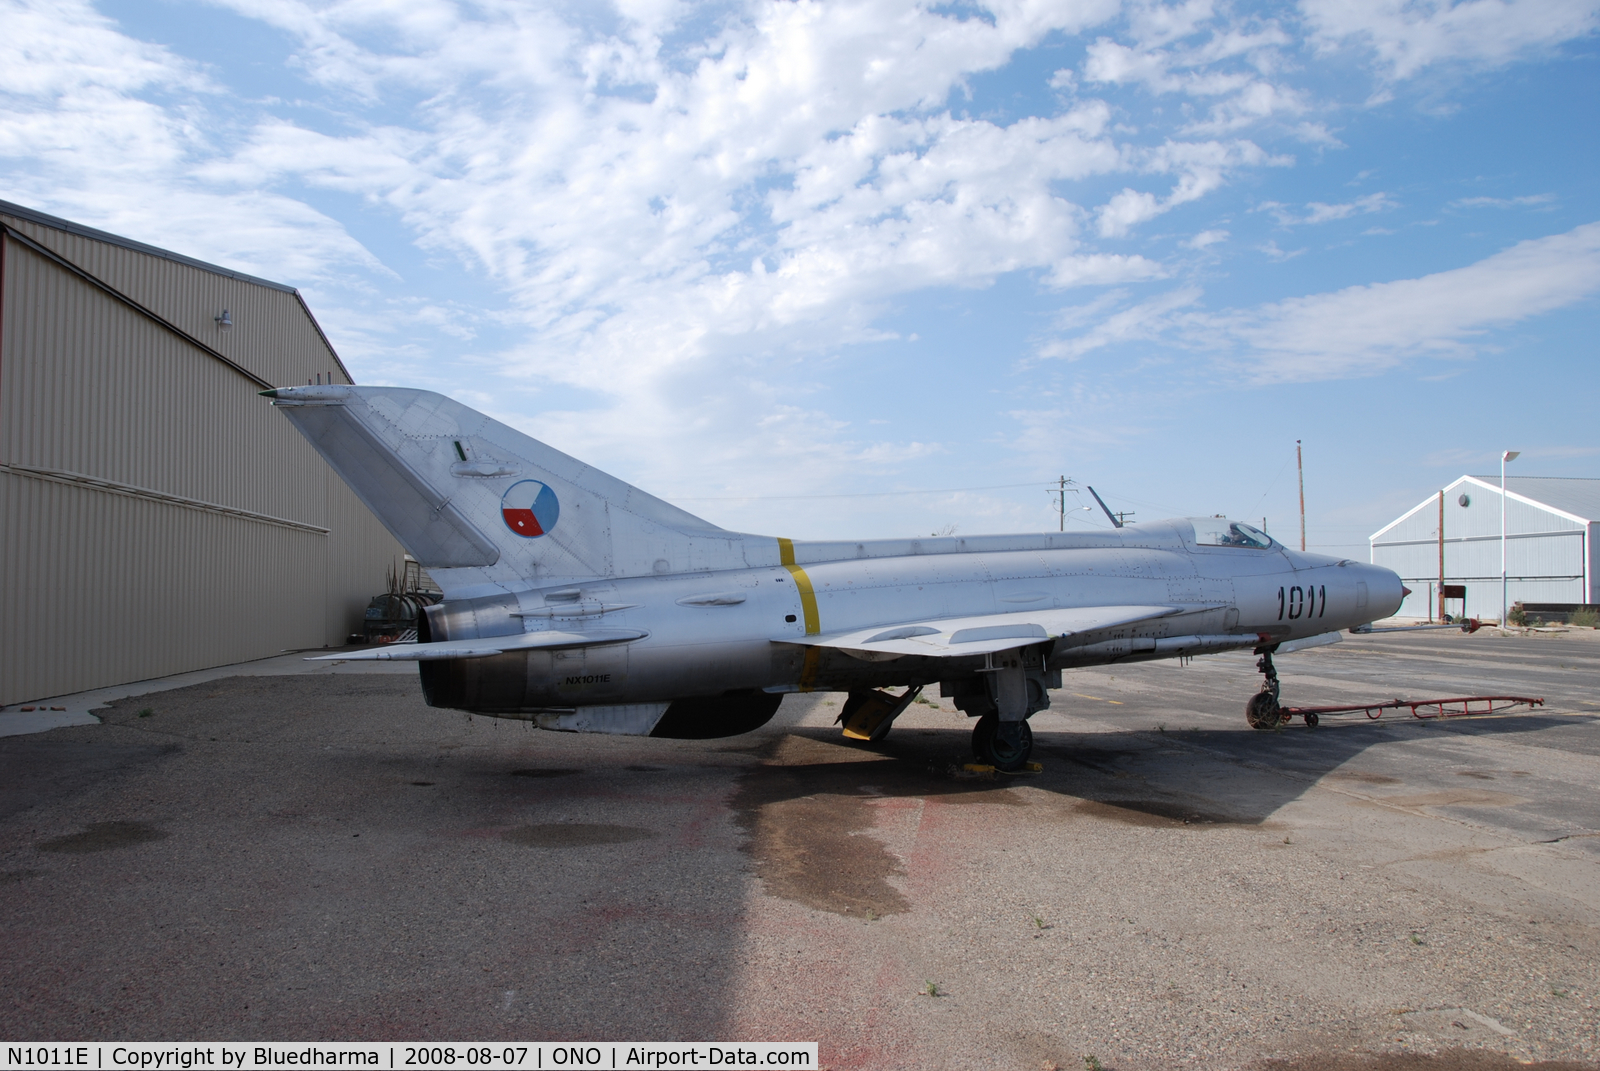 N1011E, Mikoyan-Gurevich MiG-21F-13 C/N 1011, Parked by hanger at airport.